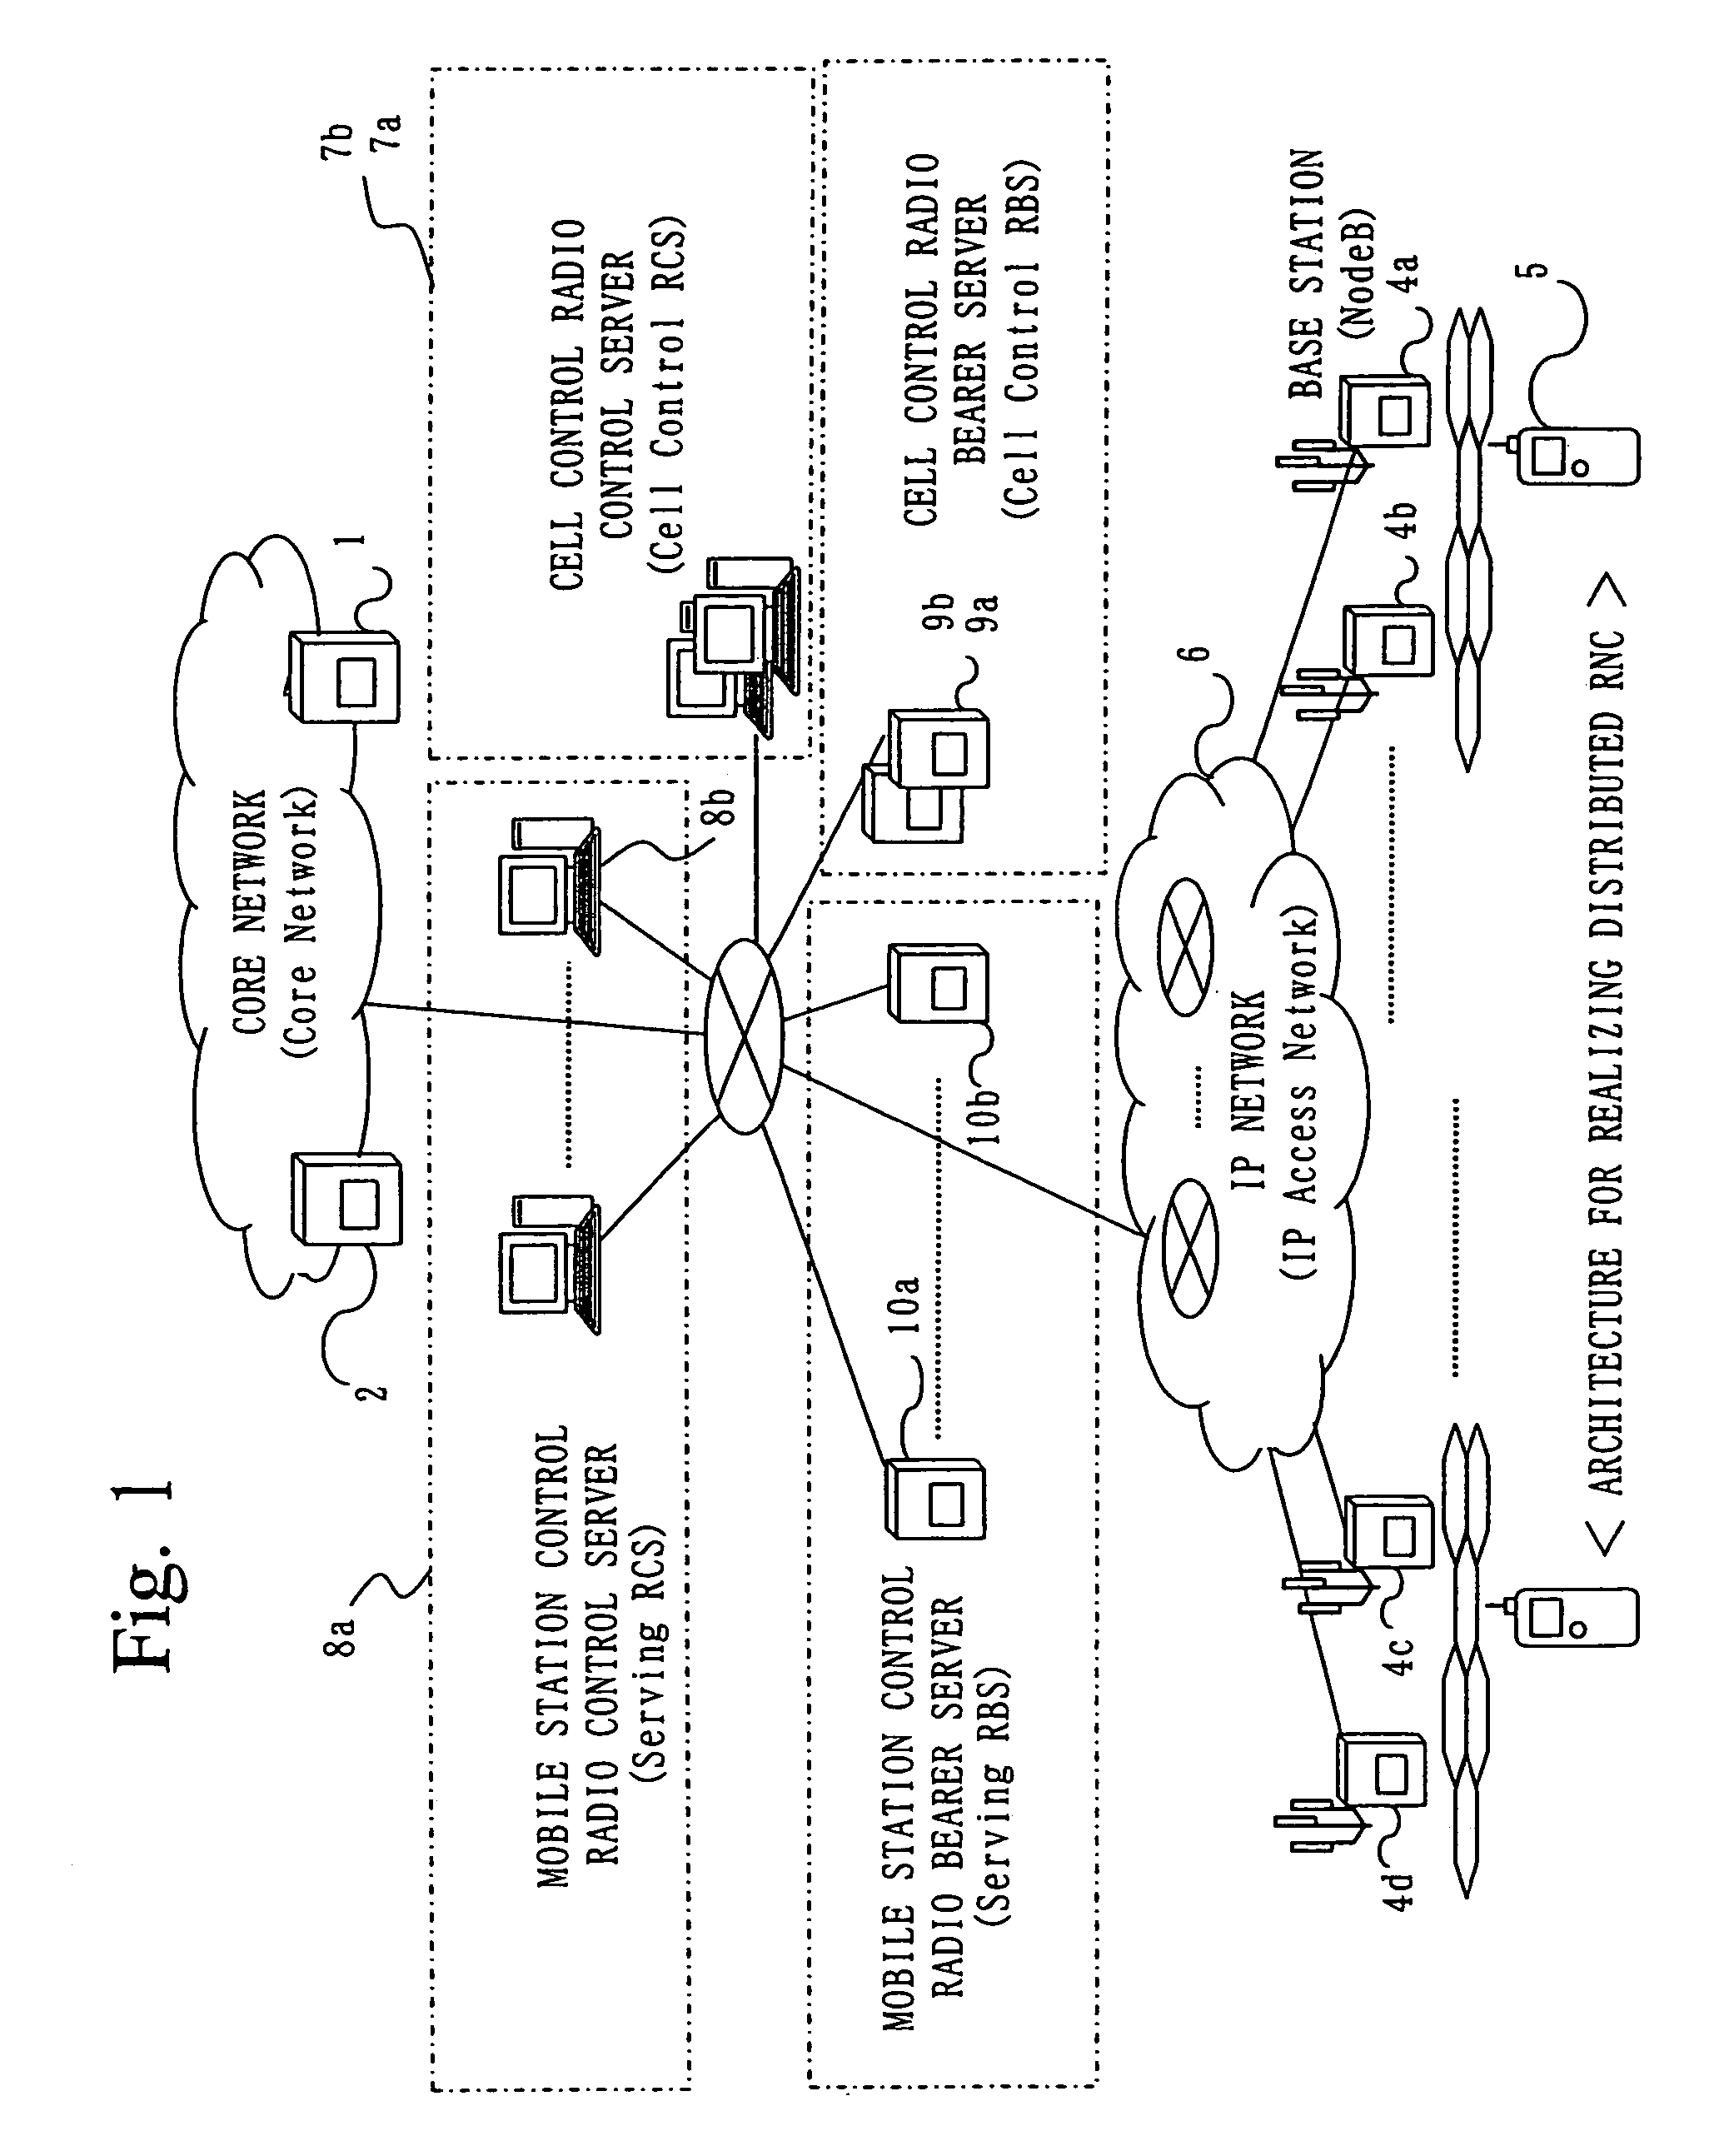 Radio area network control system and a wide area radio area network control system